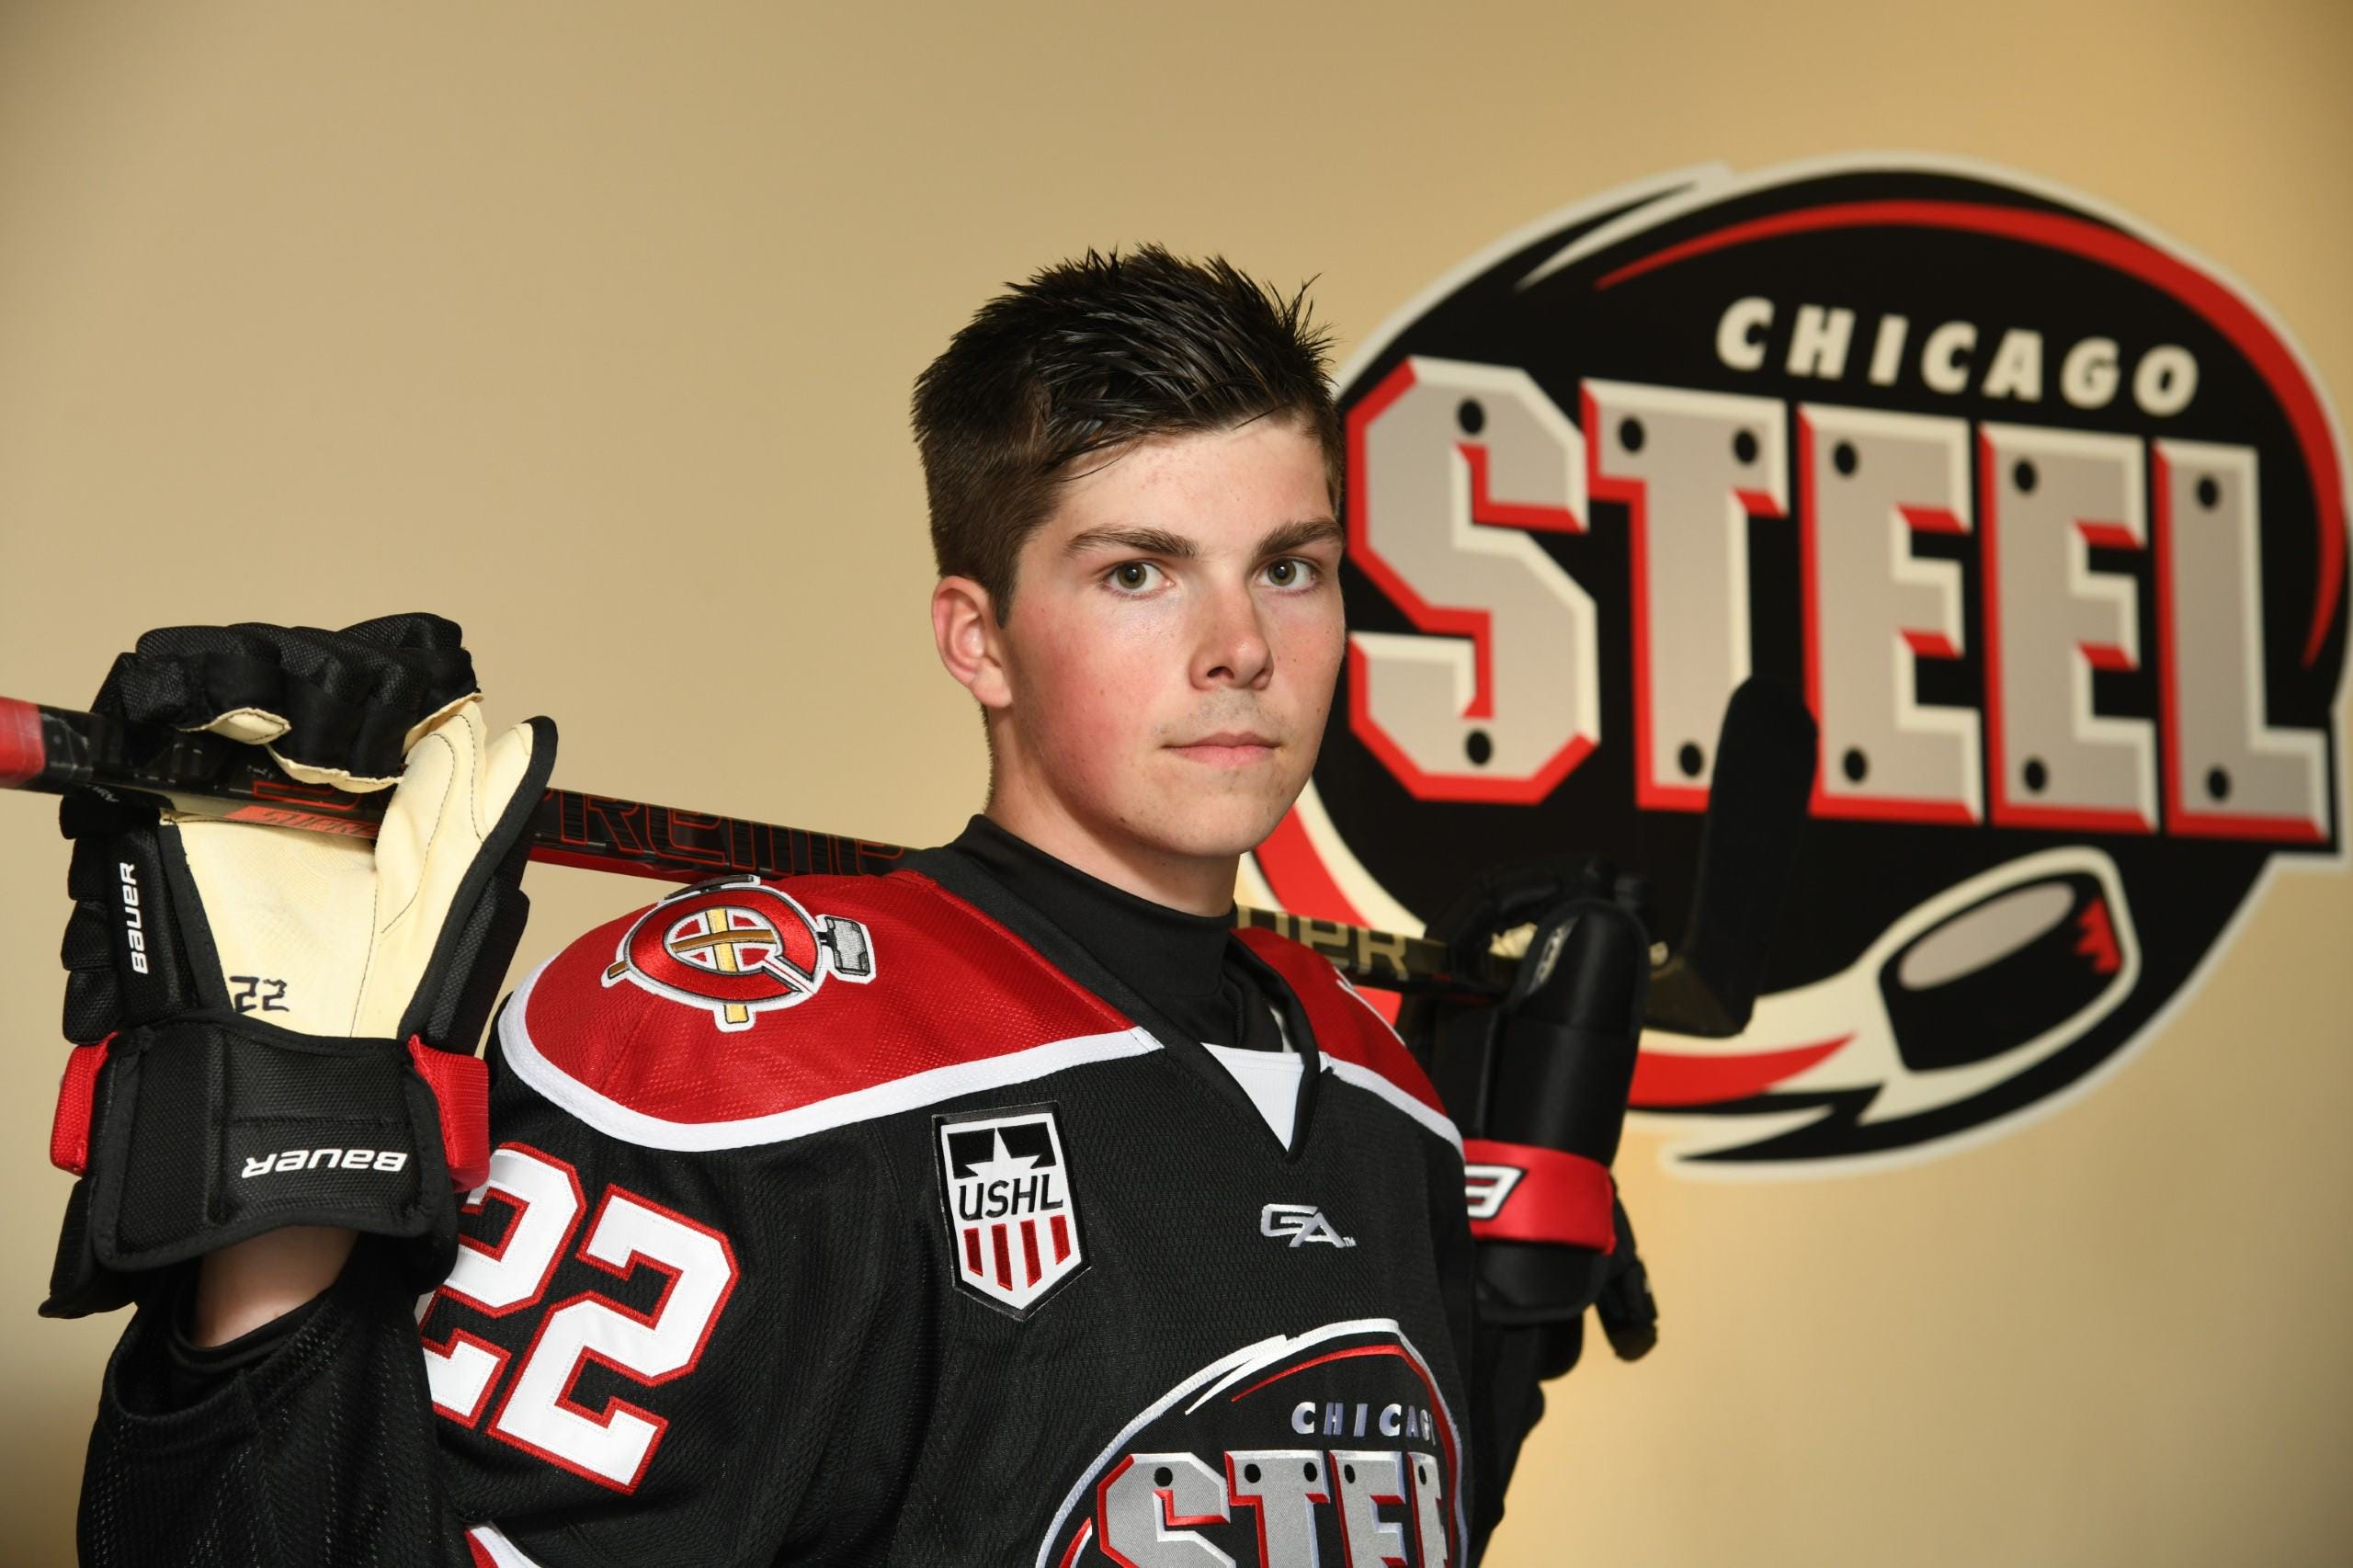 Owen Power of the Chicago Steel was named the top defenseman in the United States Hockey League last year.